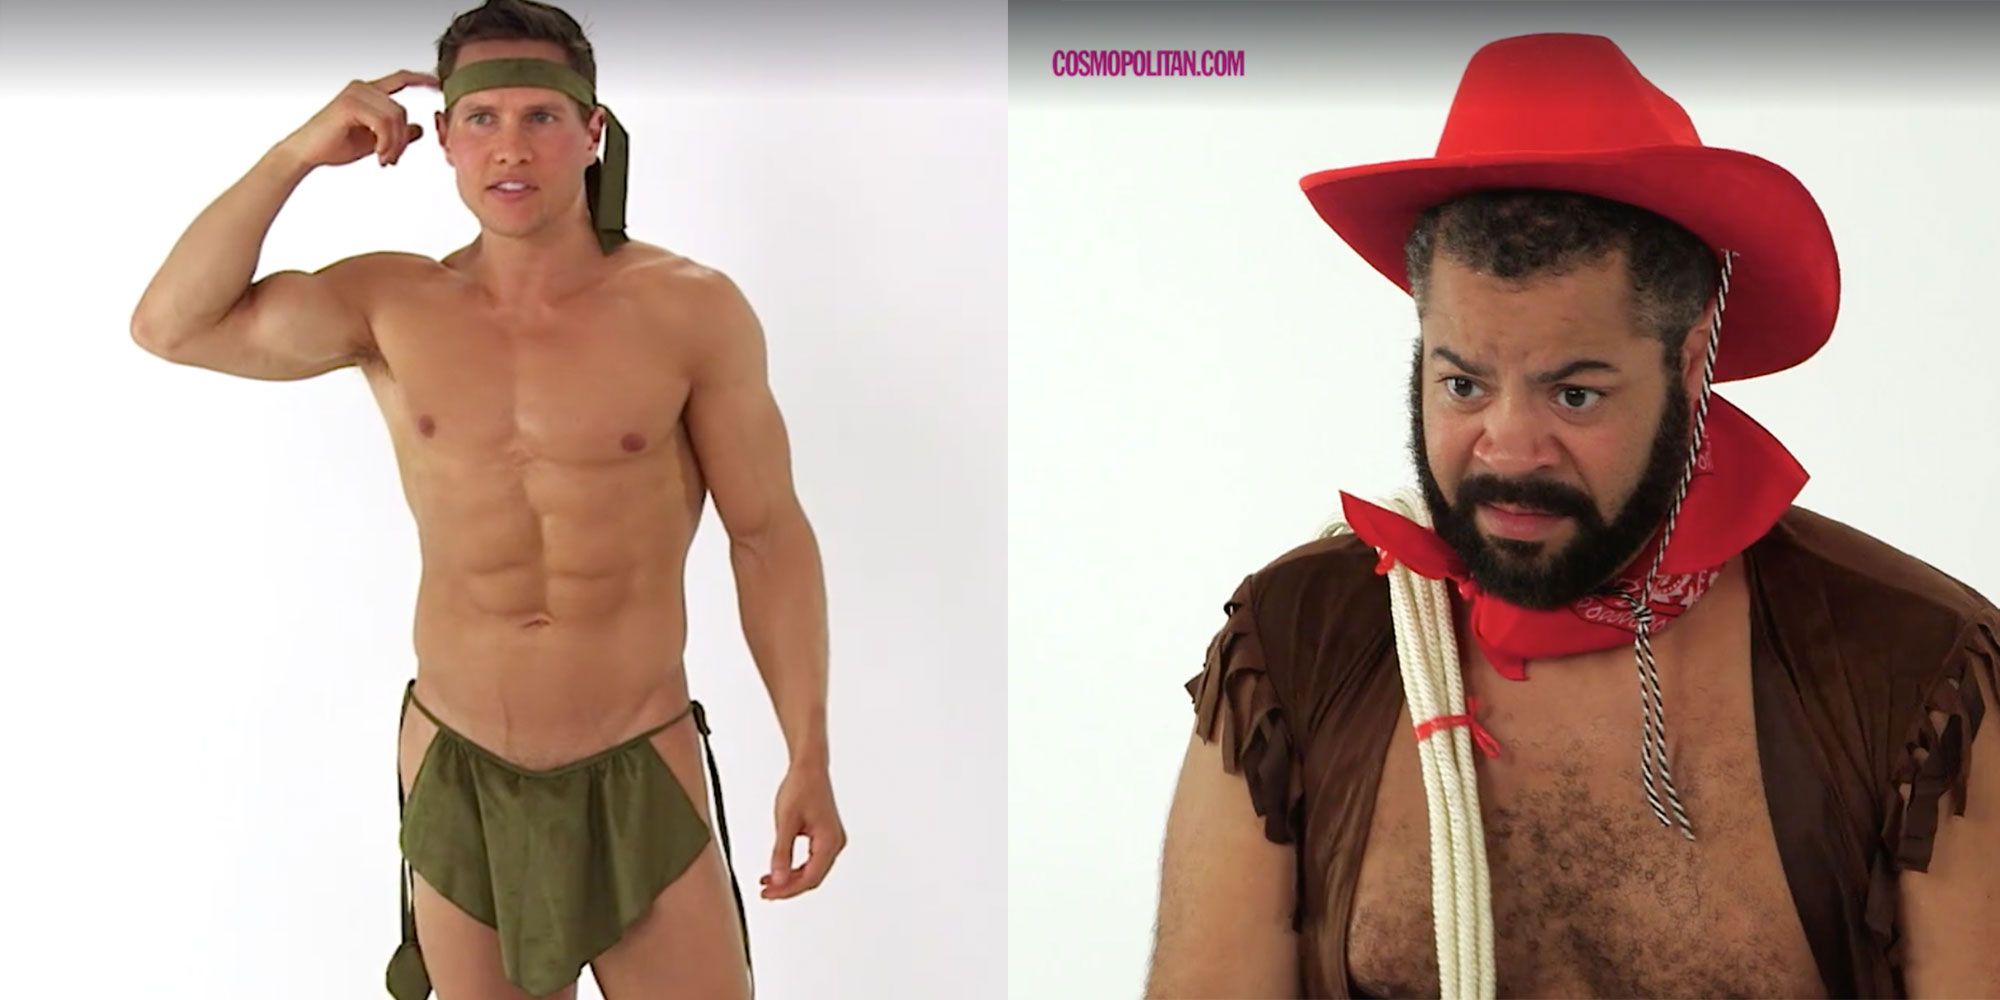 Watch These Clueless Guys Try On Super Sexy Halloween Costumes